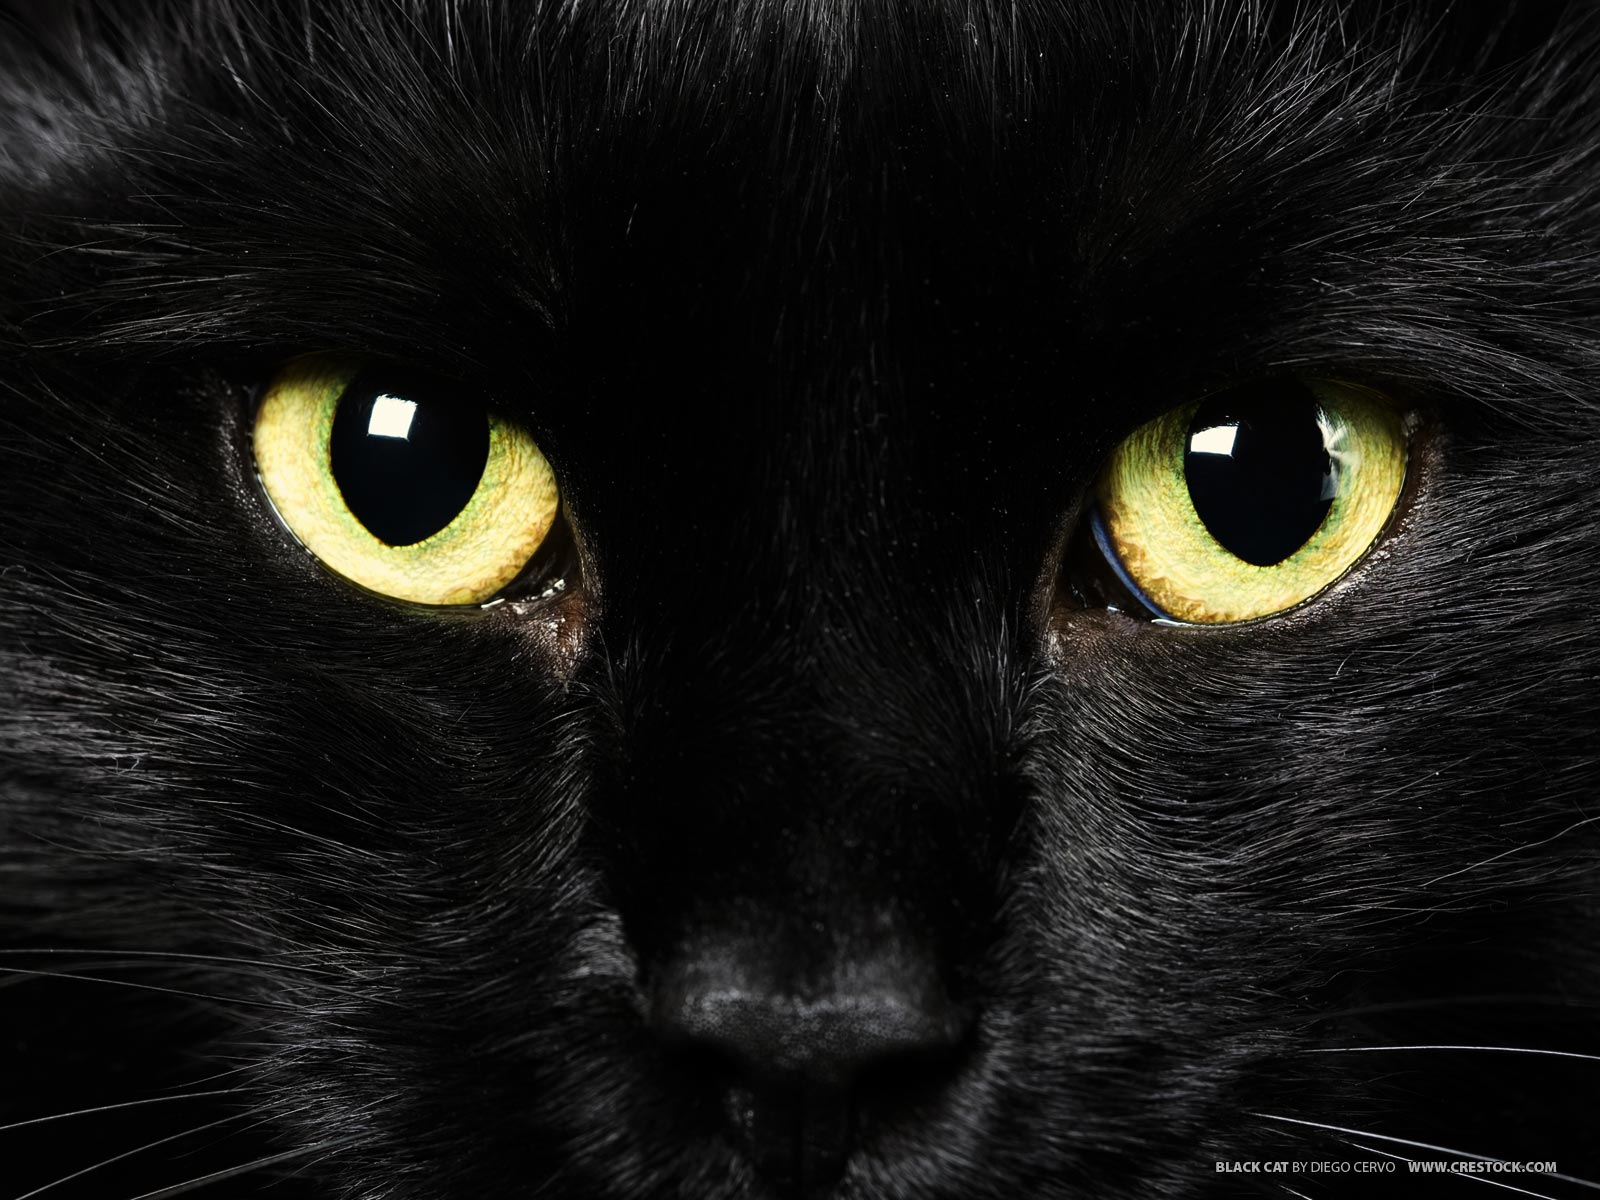 cats lover: Black Cats' Myths and Beliefs